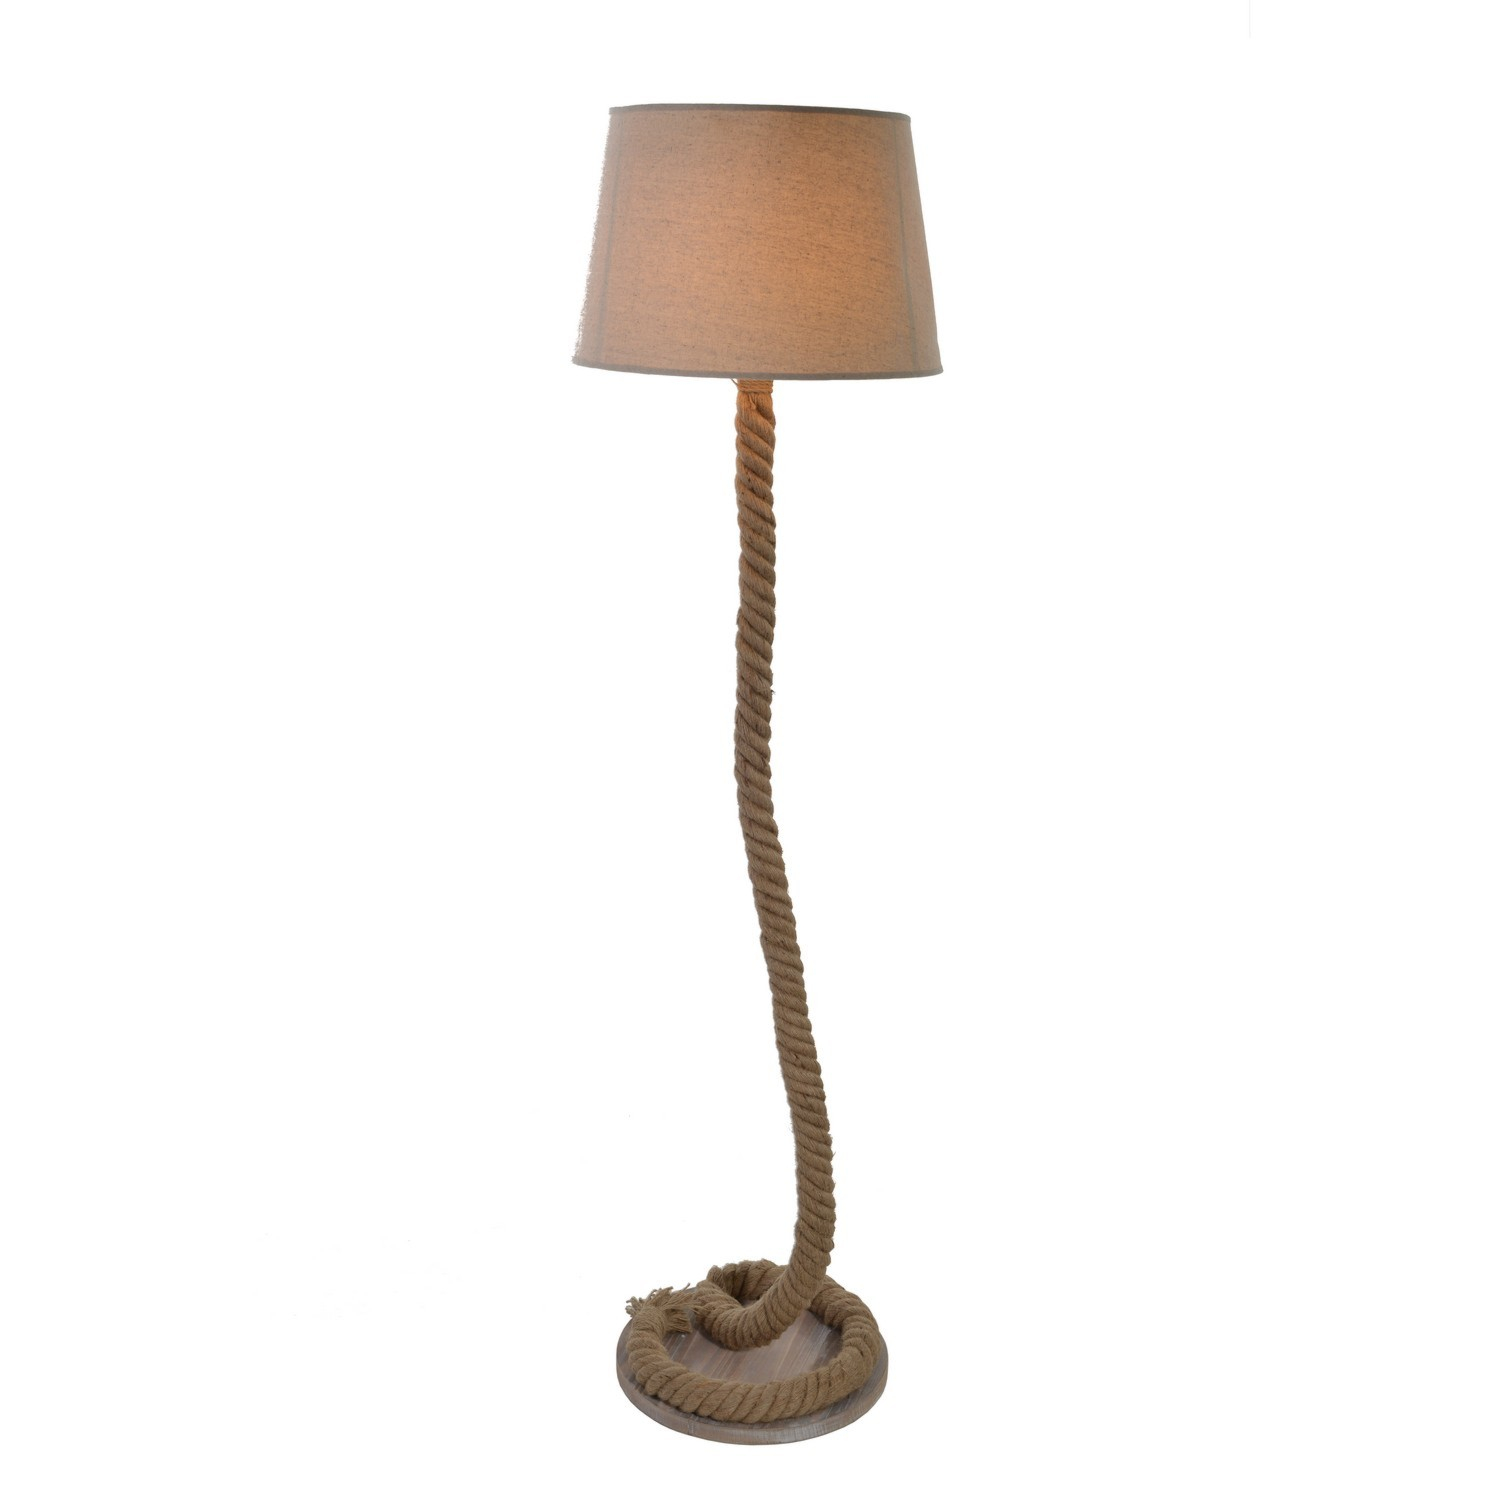 Nautical Rope Floor Lamp intended for size 1500 X 1500